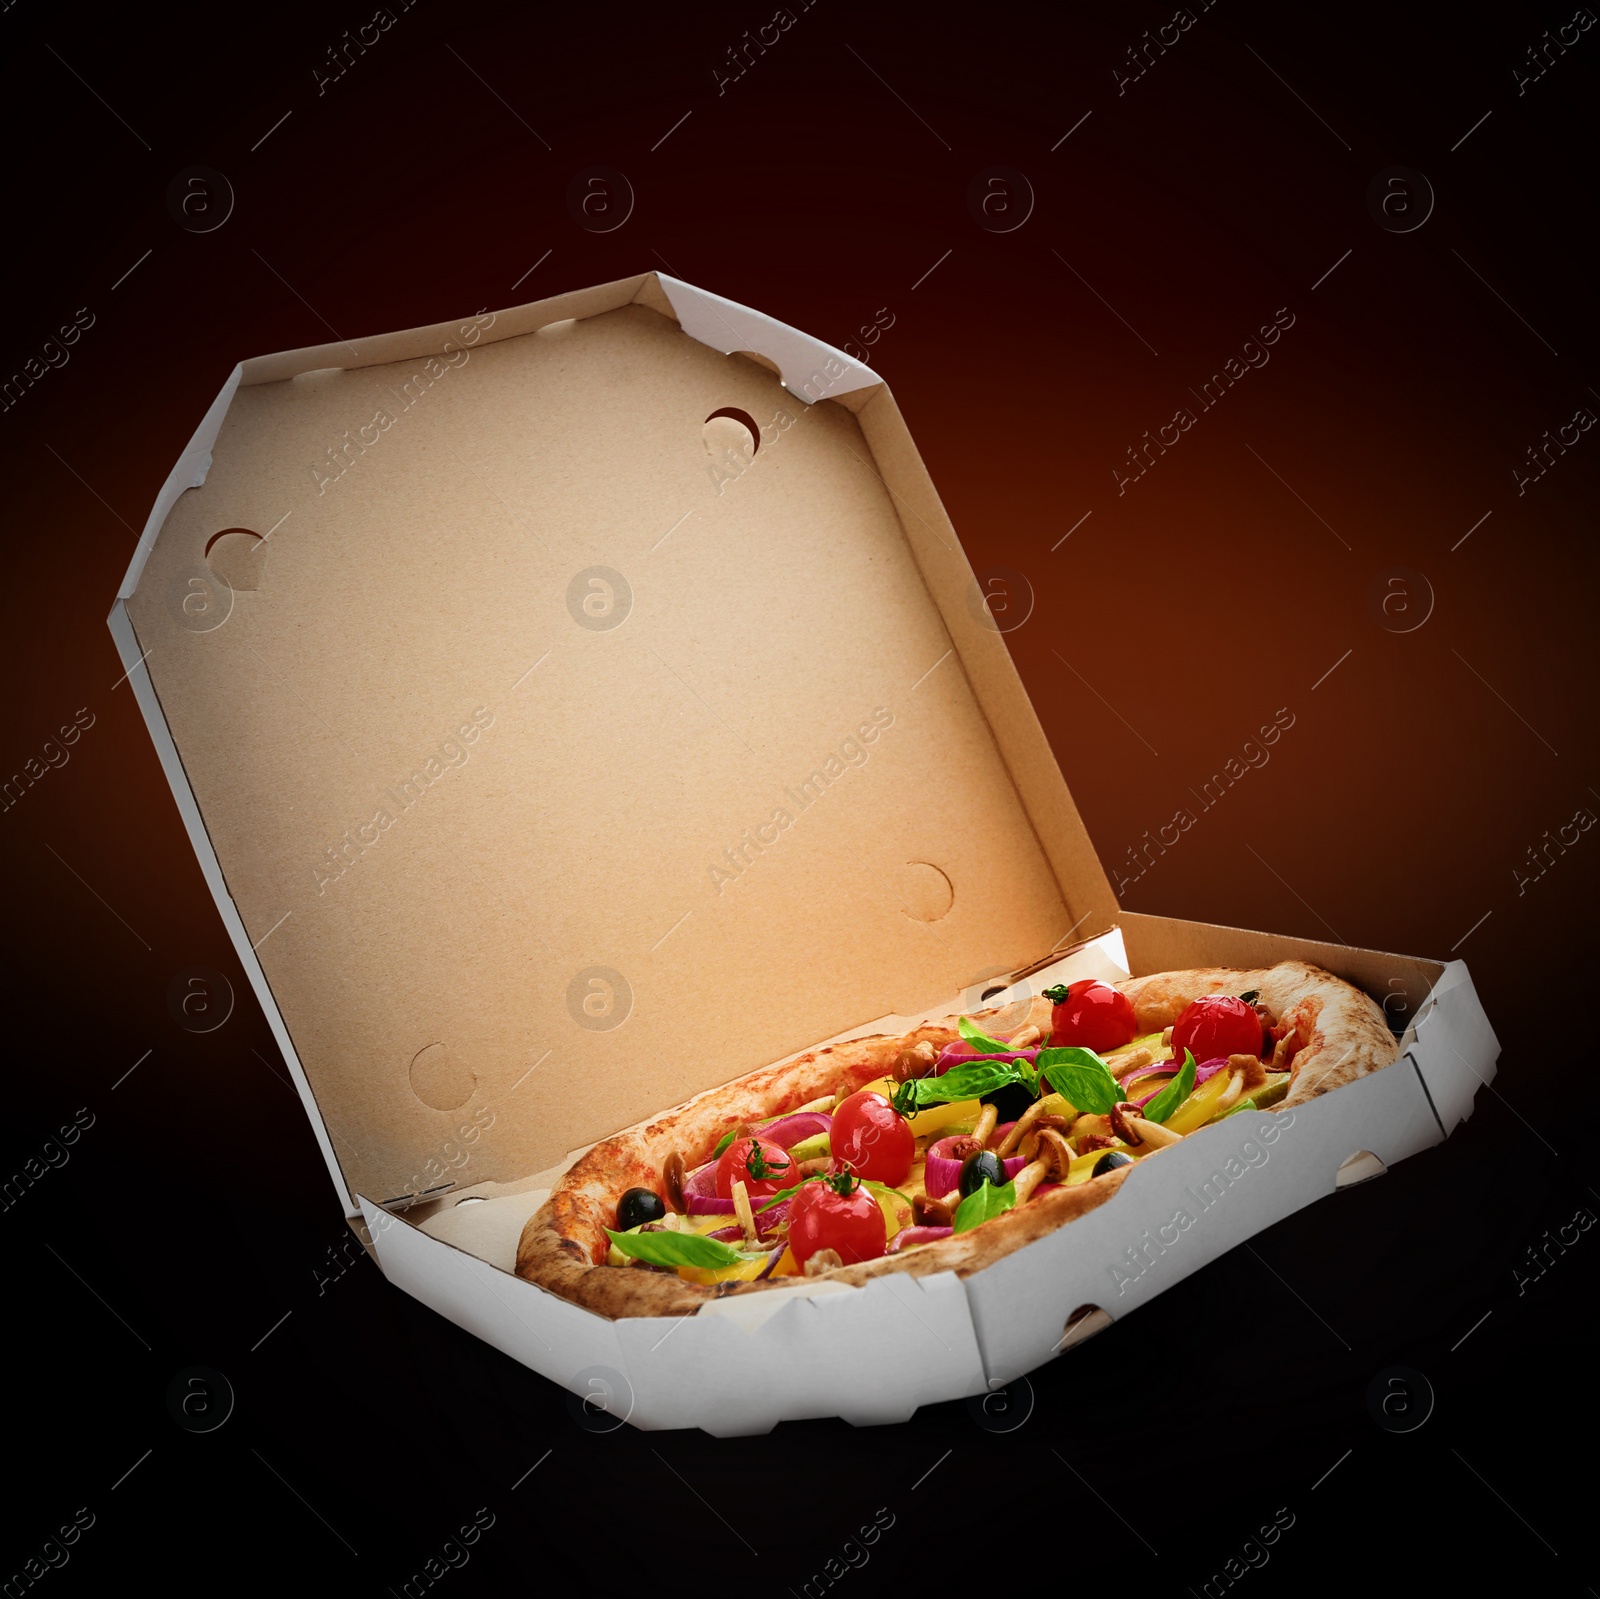 Image of Hot tasty vegetable pizza in cardboard box on dark background. Image for menu or poster